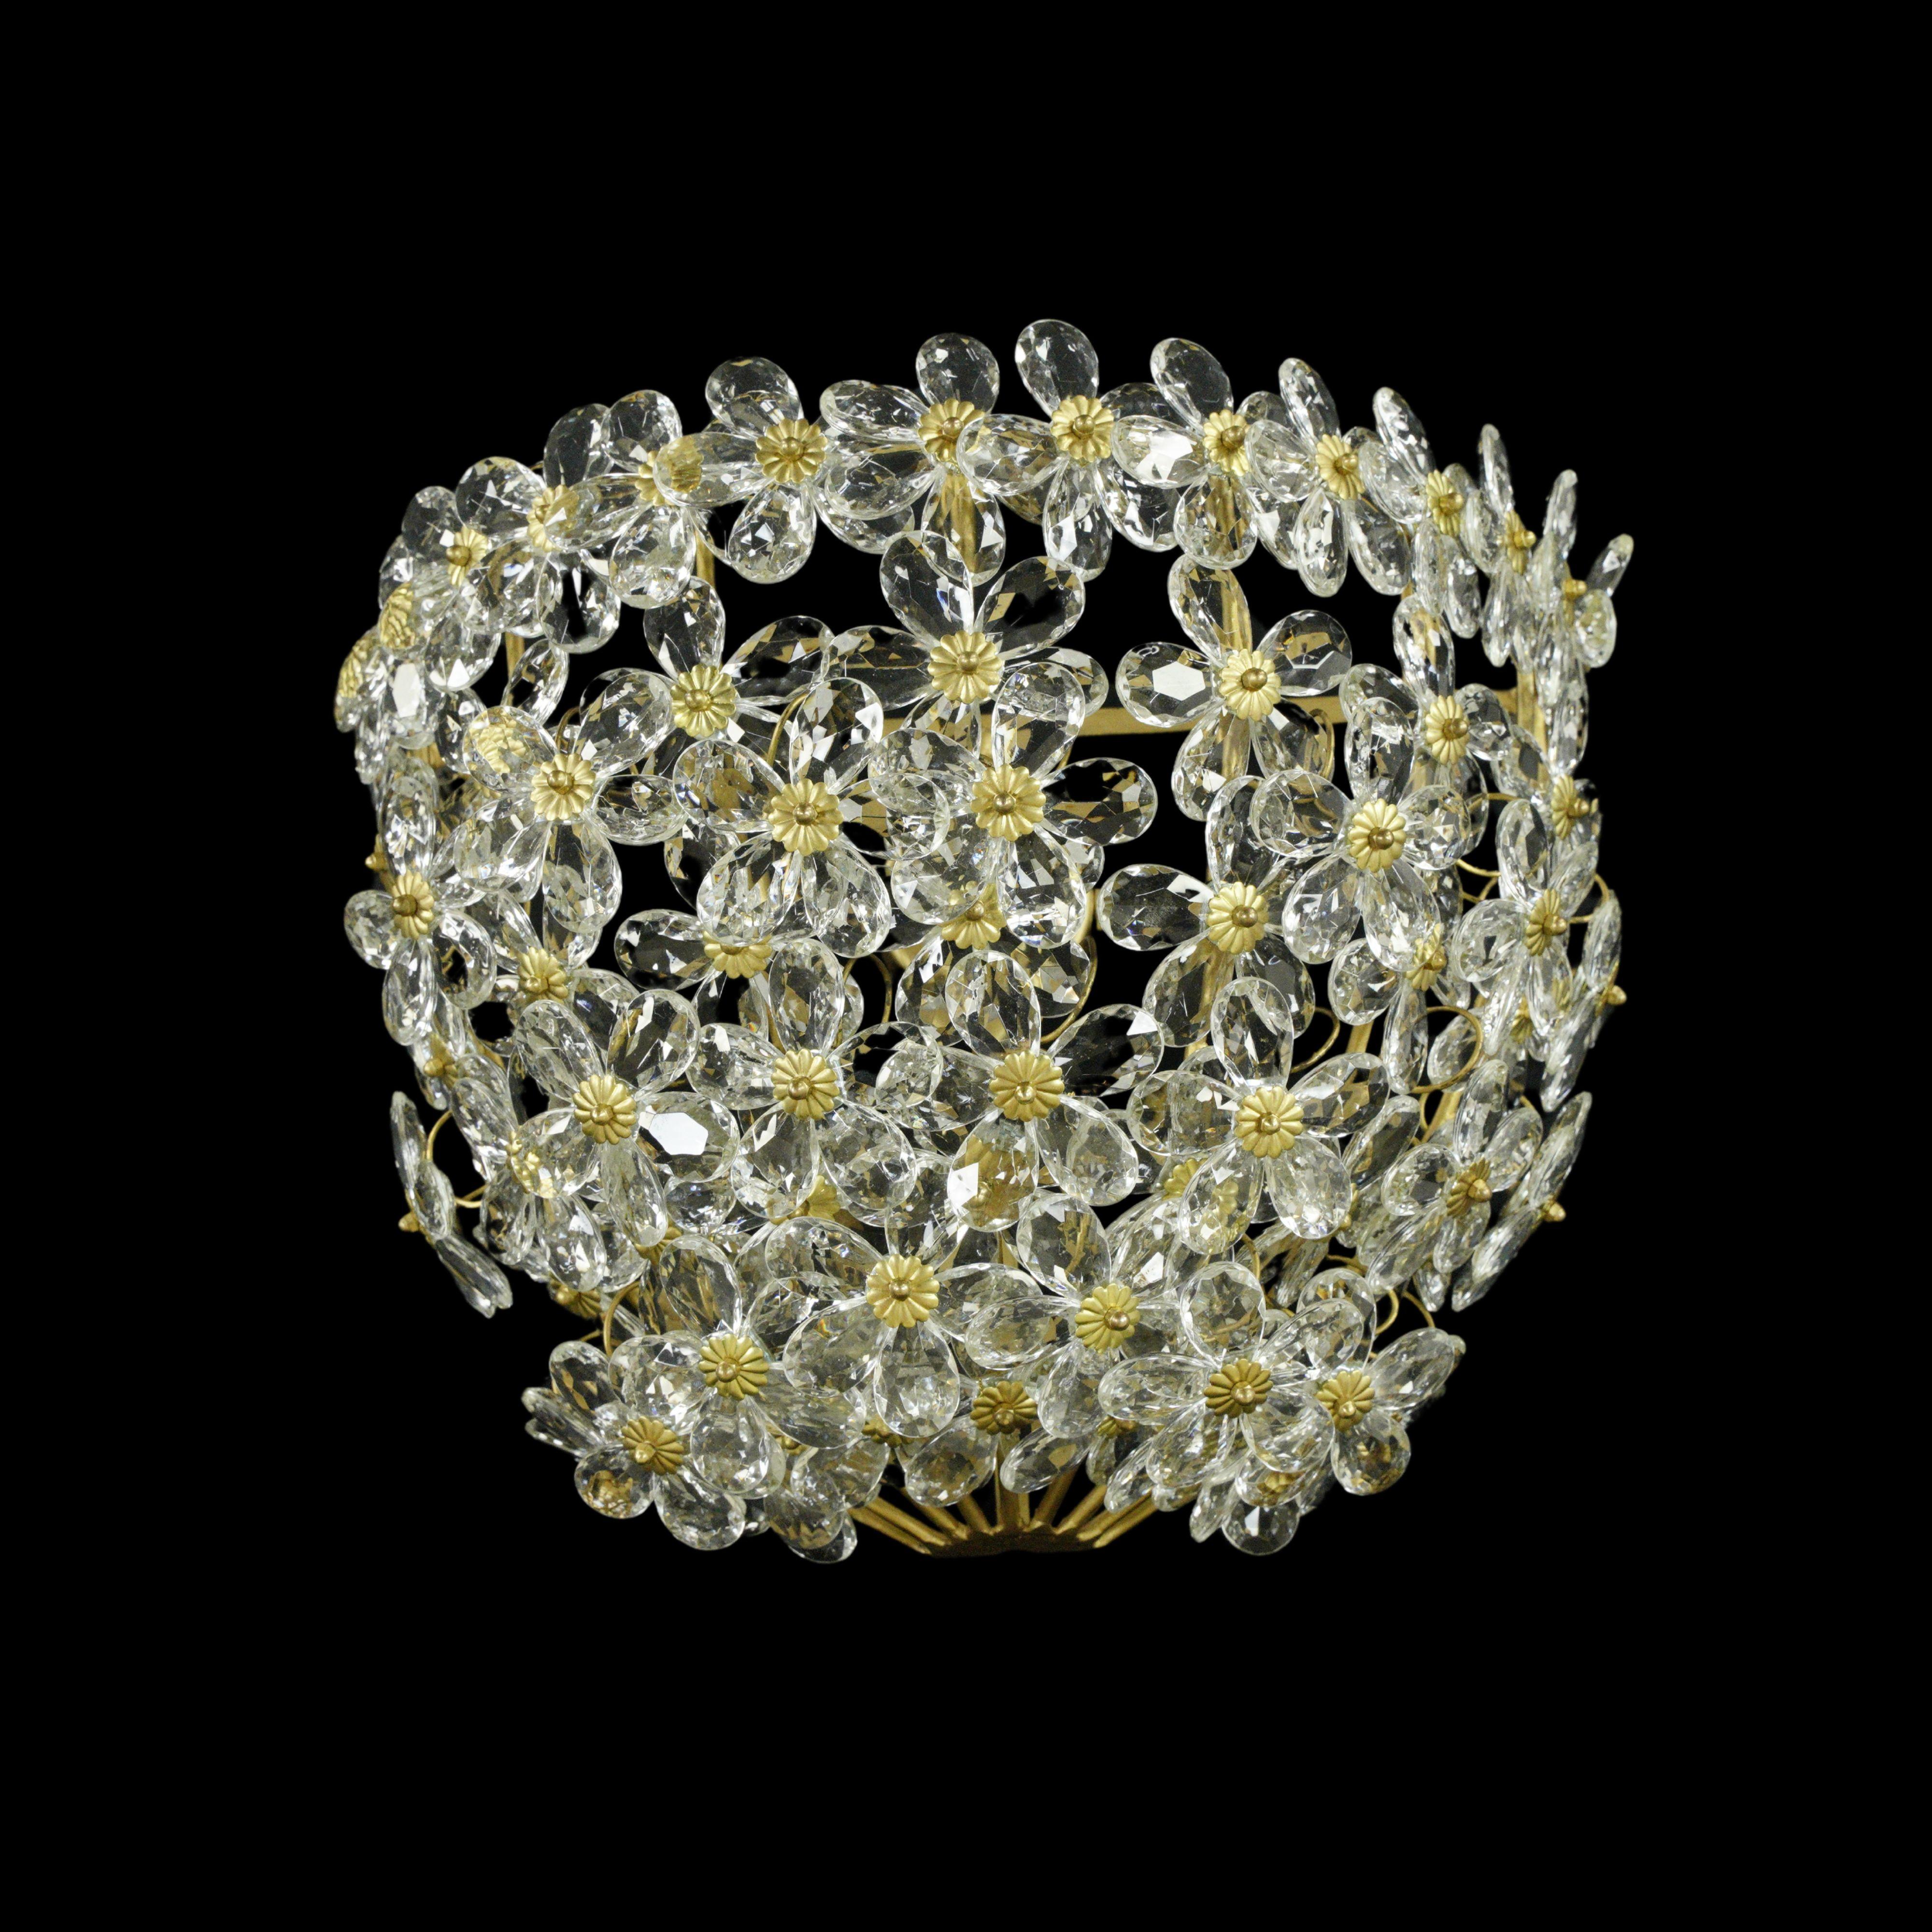 Floral daisy clear crystal basket sconce.. Each cut crystal daisy has 5 crystal petals with a brushed brass center. This requires one standard medium base bulb. One available. Cleaned and restored. Please note, this item is located in one of our NYC